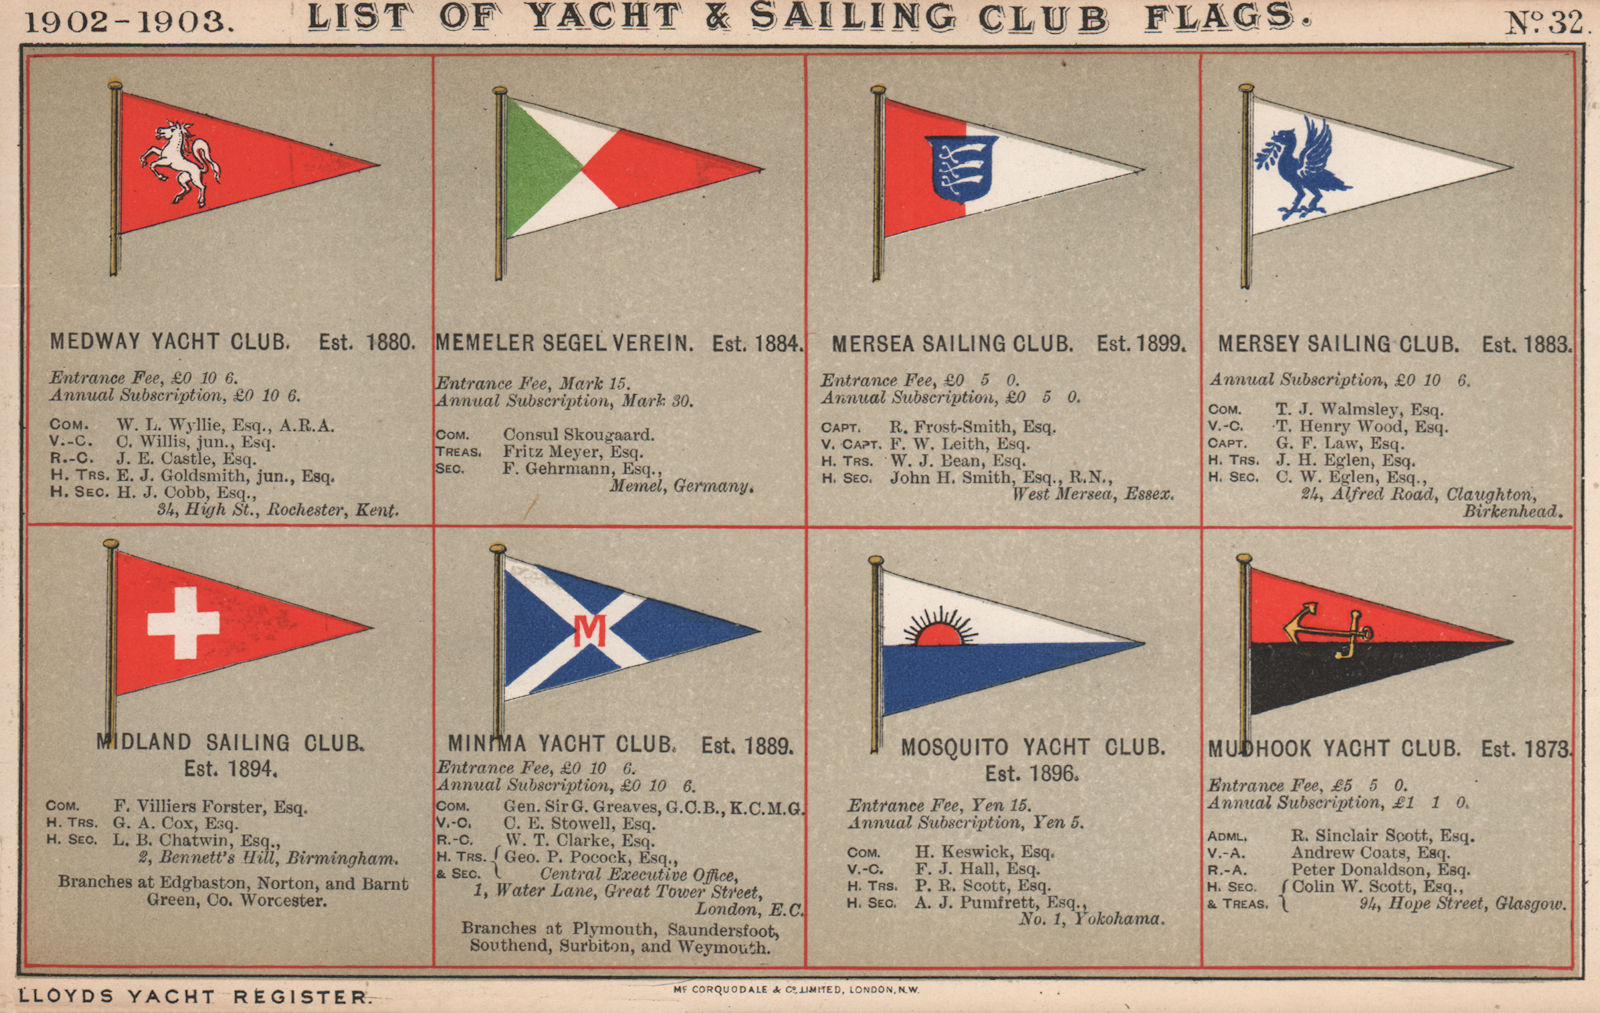 Associate Product YACHT & SAILING CLUB FLAGS M. Medway - Mersey - Midland - Minima - Mudhook 1902